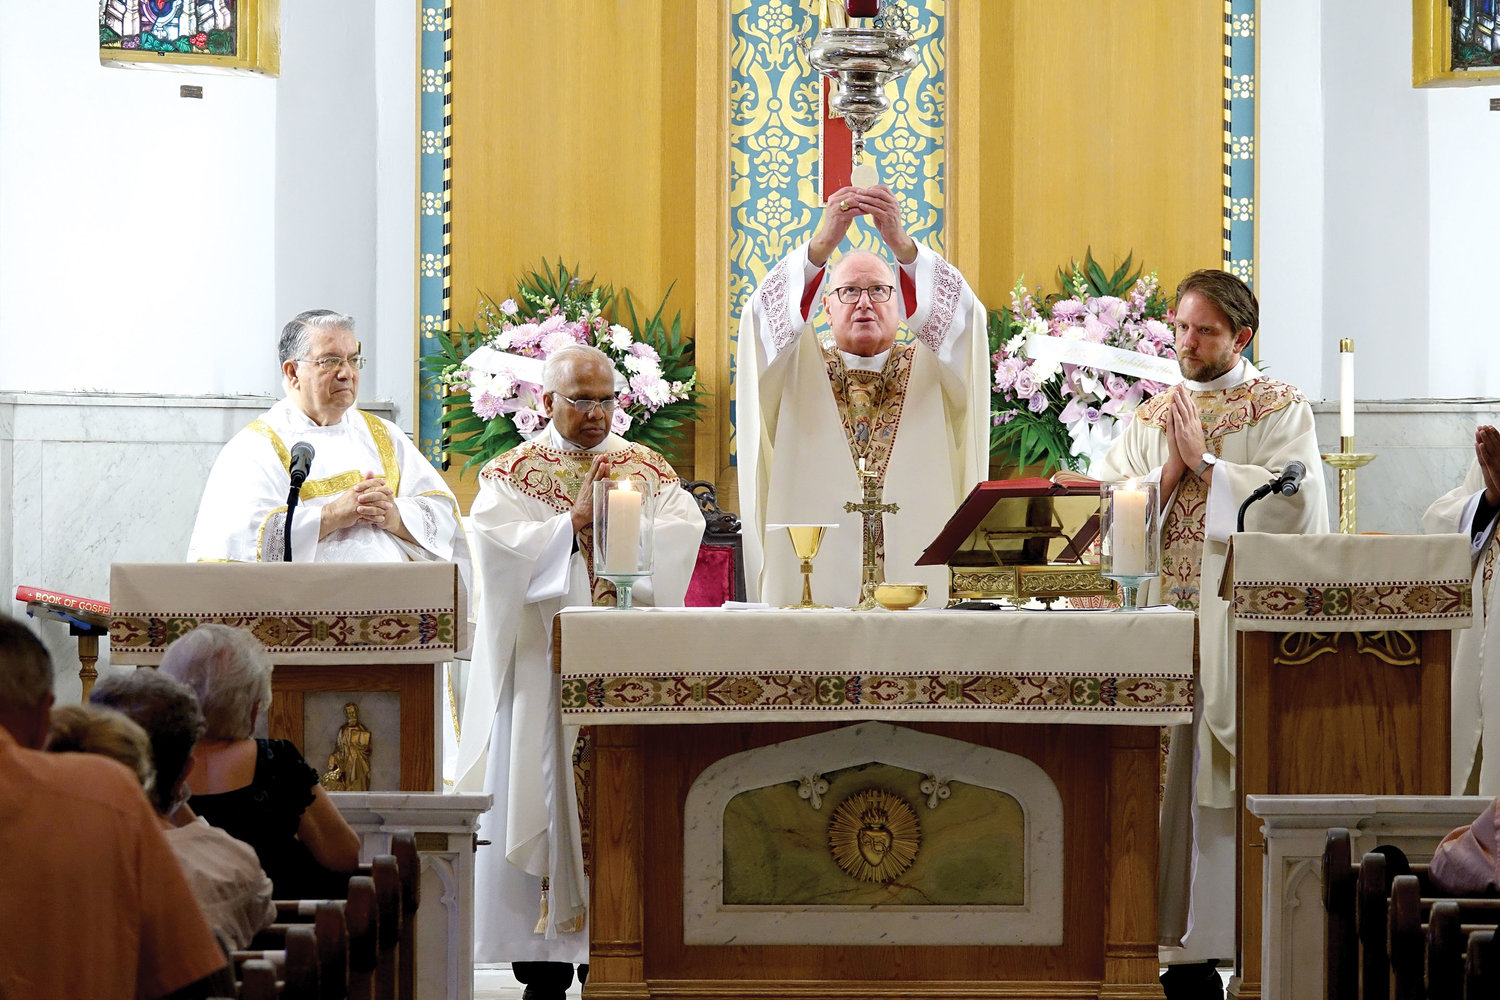 Cardinal Dolan elevates the Eucharist during Mass. At the altar are Deacon Anthony Viola, far left, of Immaculate Conception and Assumption of Our Lady parish, Tuckahoe; Father Joseph Emmanuel, pastor of St. Joan of Arc-Our Lady of Mount Carmel; and Father Stephen Ries, right, priest secretary to Cardinal Dolan.